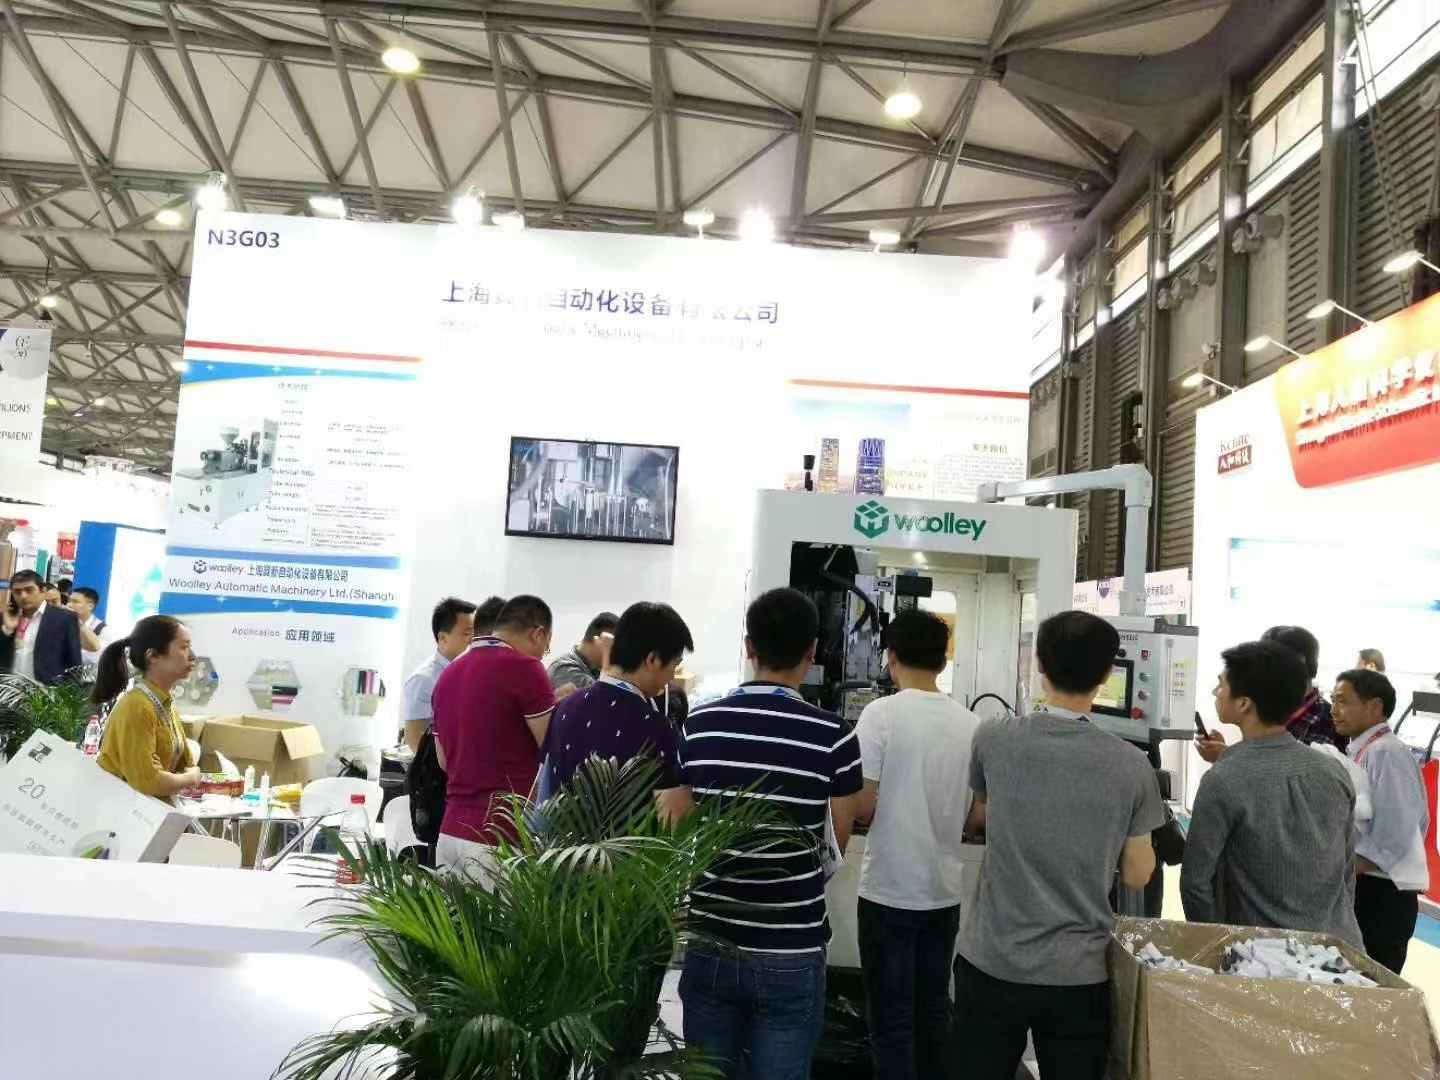 China Beauty Expo CBE exhibition showing off Woolley Heading Machine.jpg